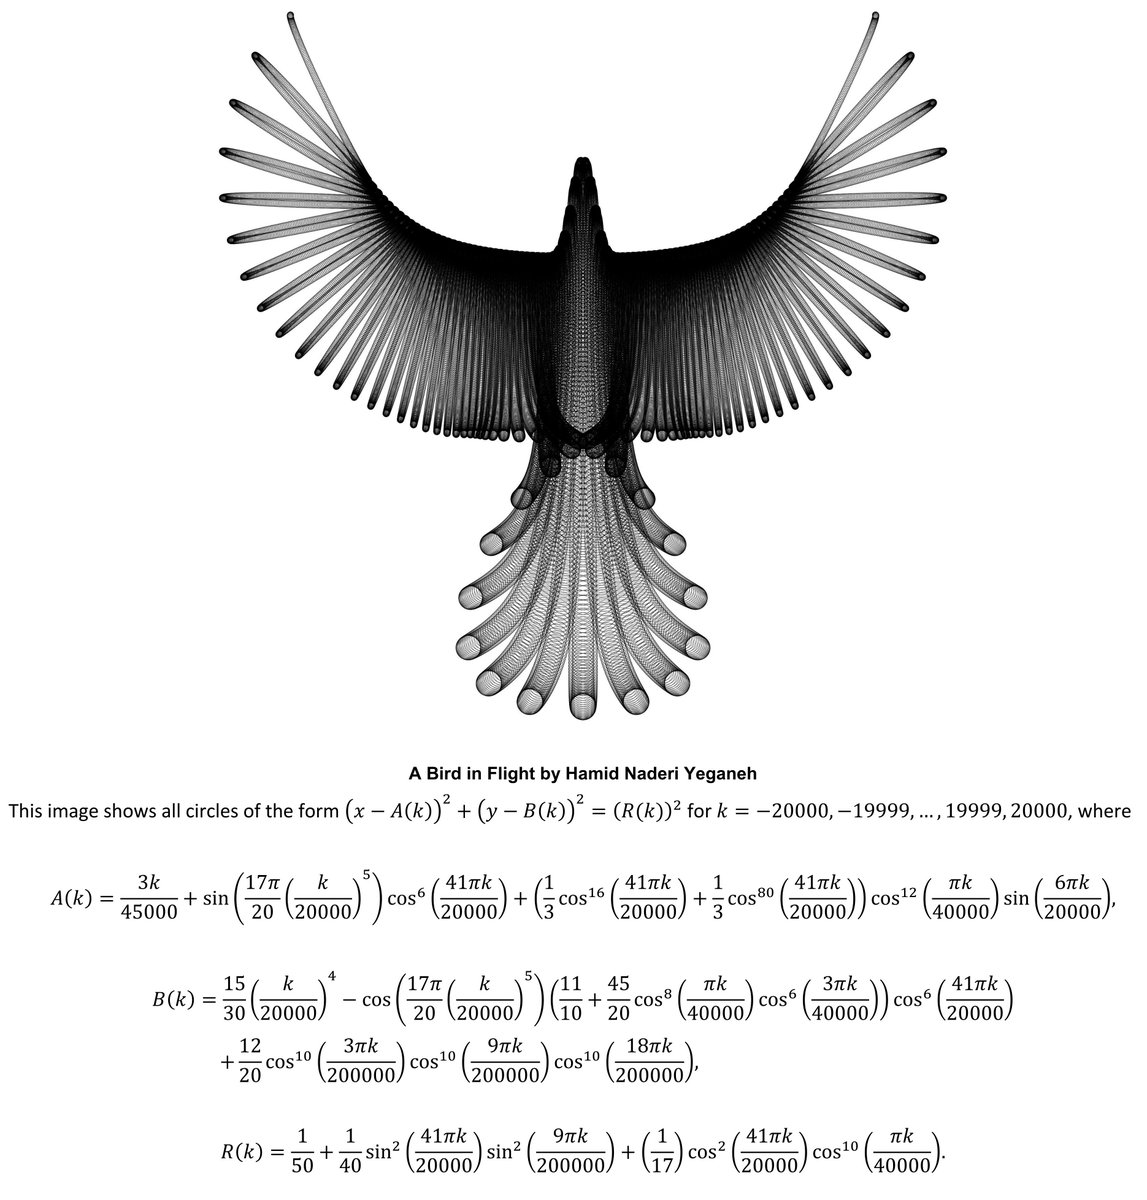 Mathematics and beauty.

Bird in Flight, rises from the fabric of mathematics, by Hamid Naderi Yeganeh,@naderi_yeganeh, Used with permission.  Magnify image to see amazing detail.